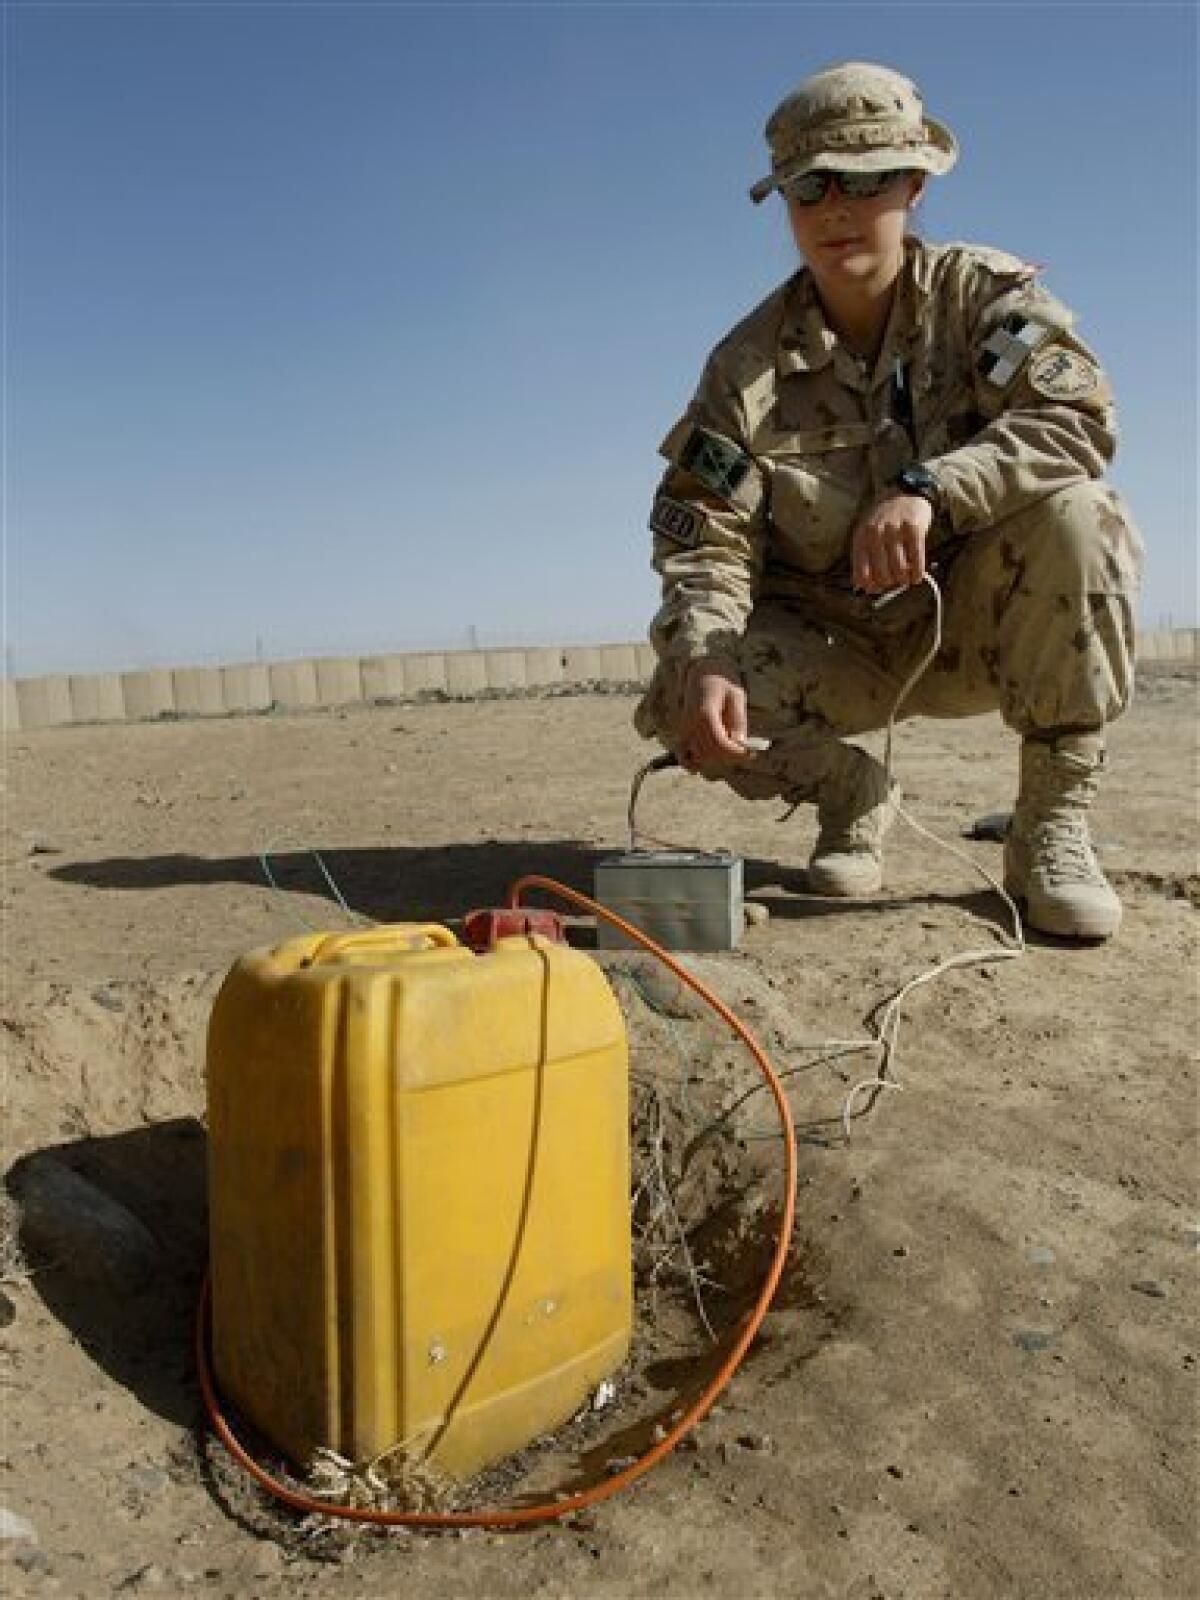 Lt. Caroline Pollock from Calgary, Alberta of the Canadian Counter Improvised Explosive Device Squadron (CIED), is seen as she sets up an IED for training purposes at Camp Hero in Kandahar, southern Afghanistan, Monday, Feb. 1, 2010. (AP Photo/Kirsty Wigglesworth)